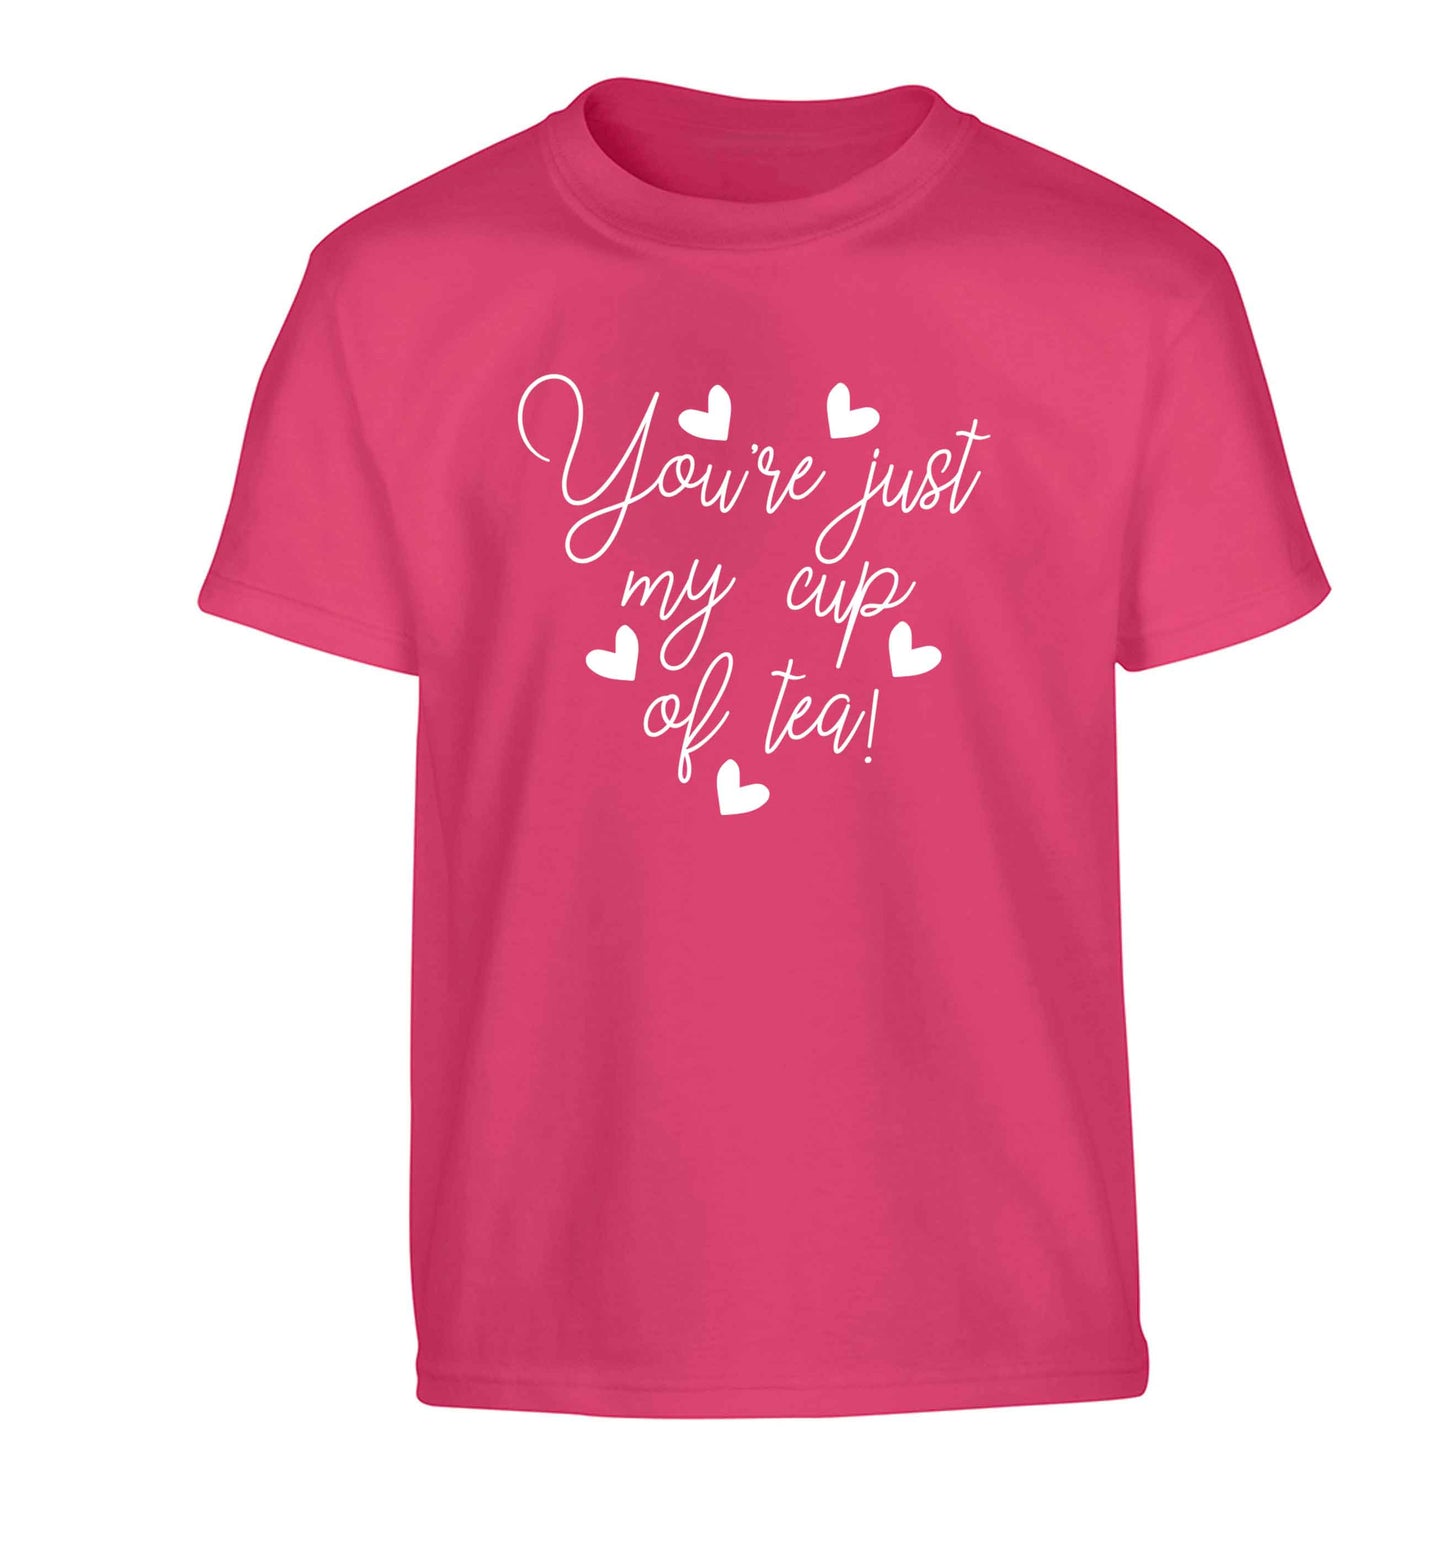 You're just my cup of tea Children's pink Tshirt 12-13 Years